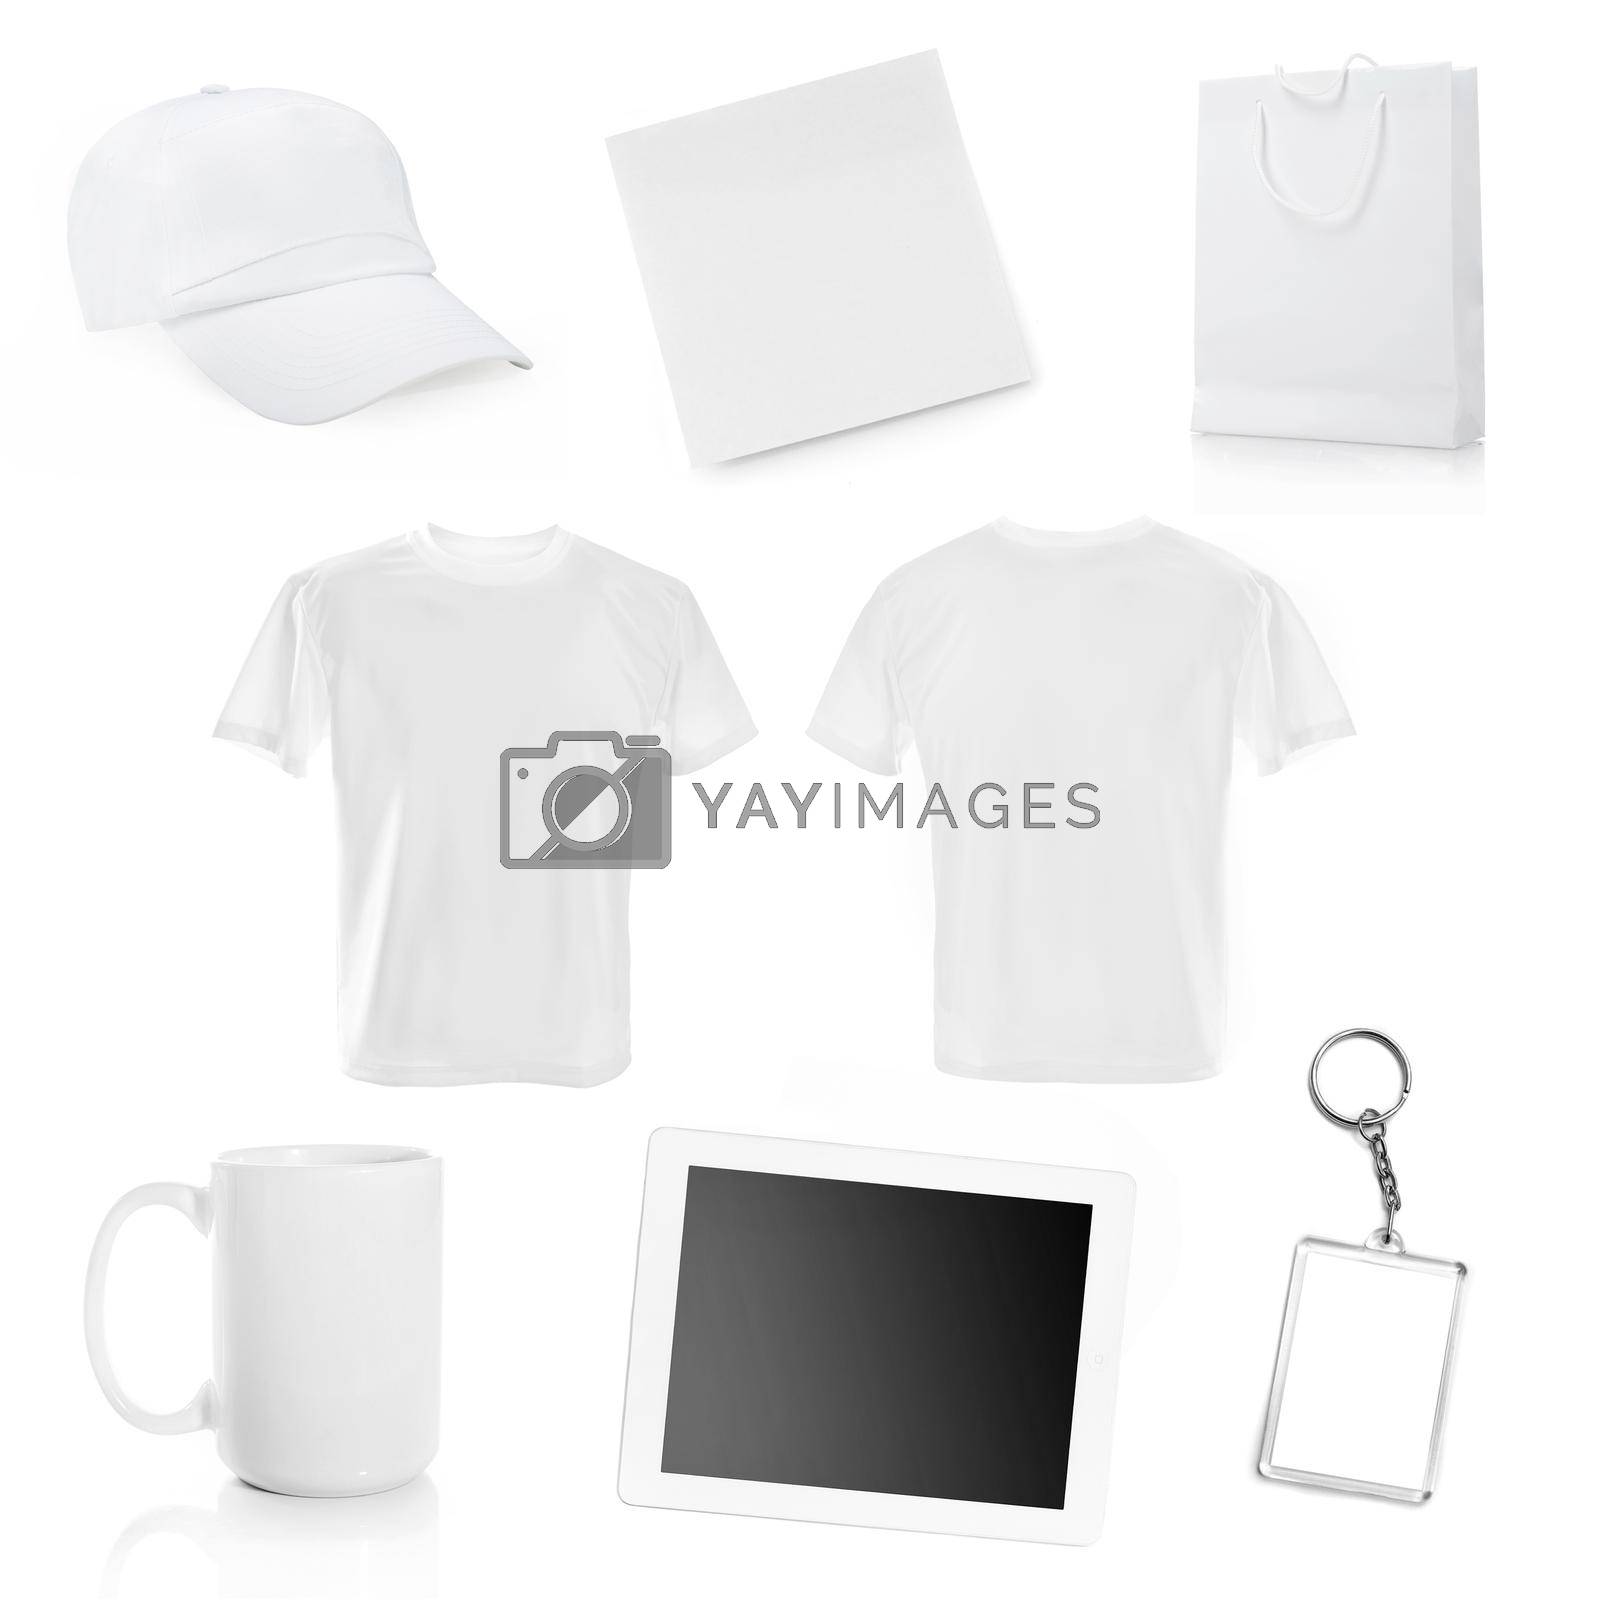 Royalty free image of collage of white objects by GekaSkr